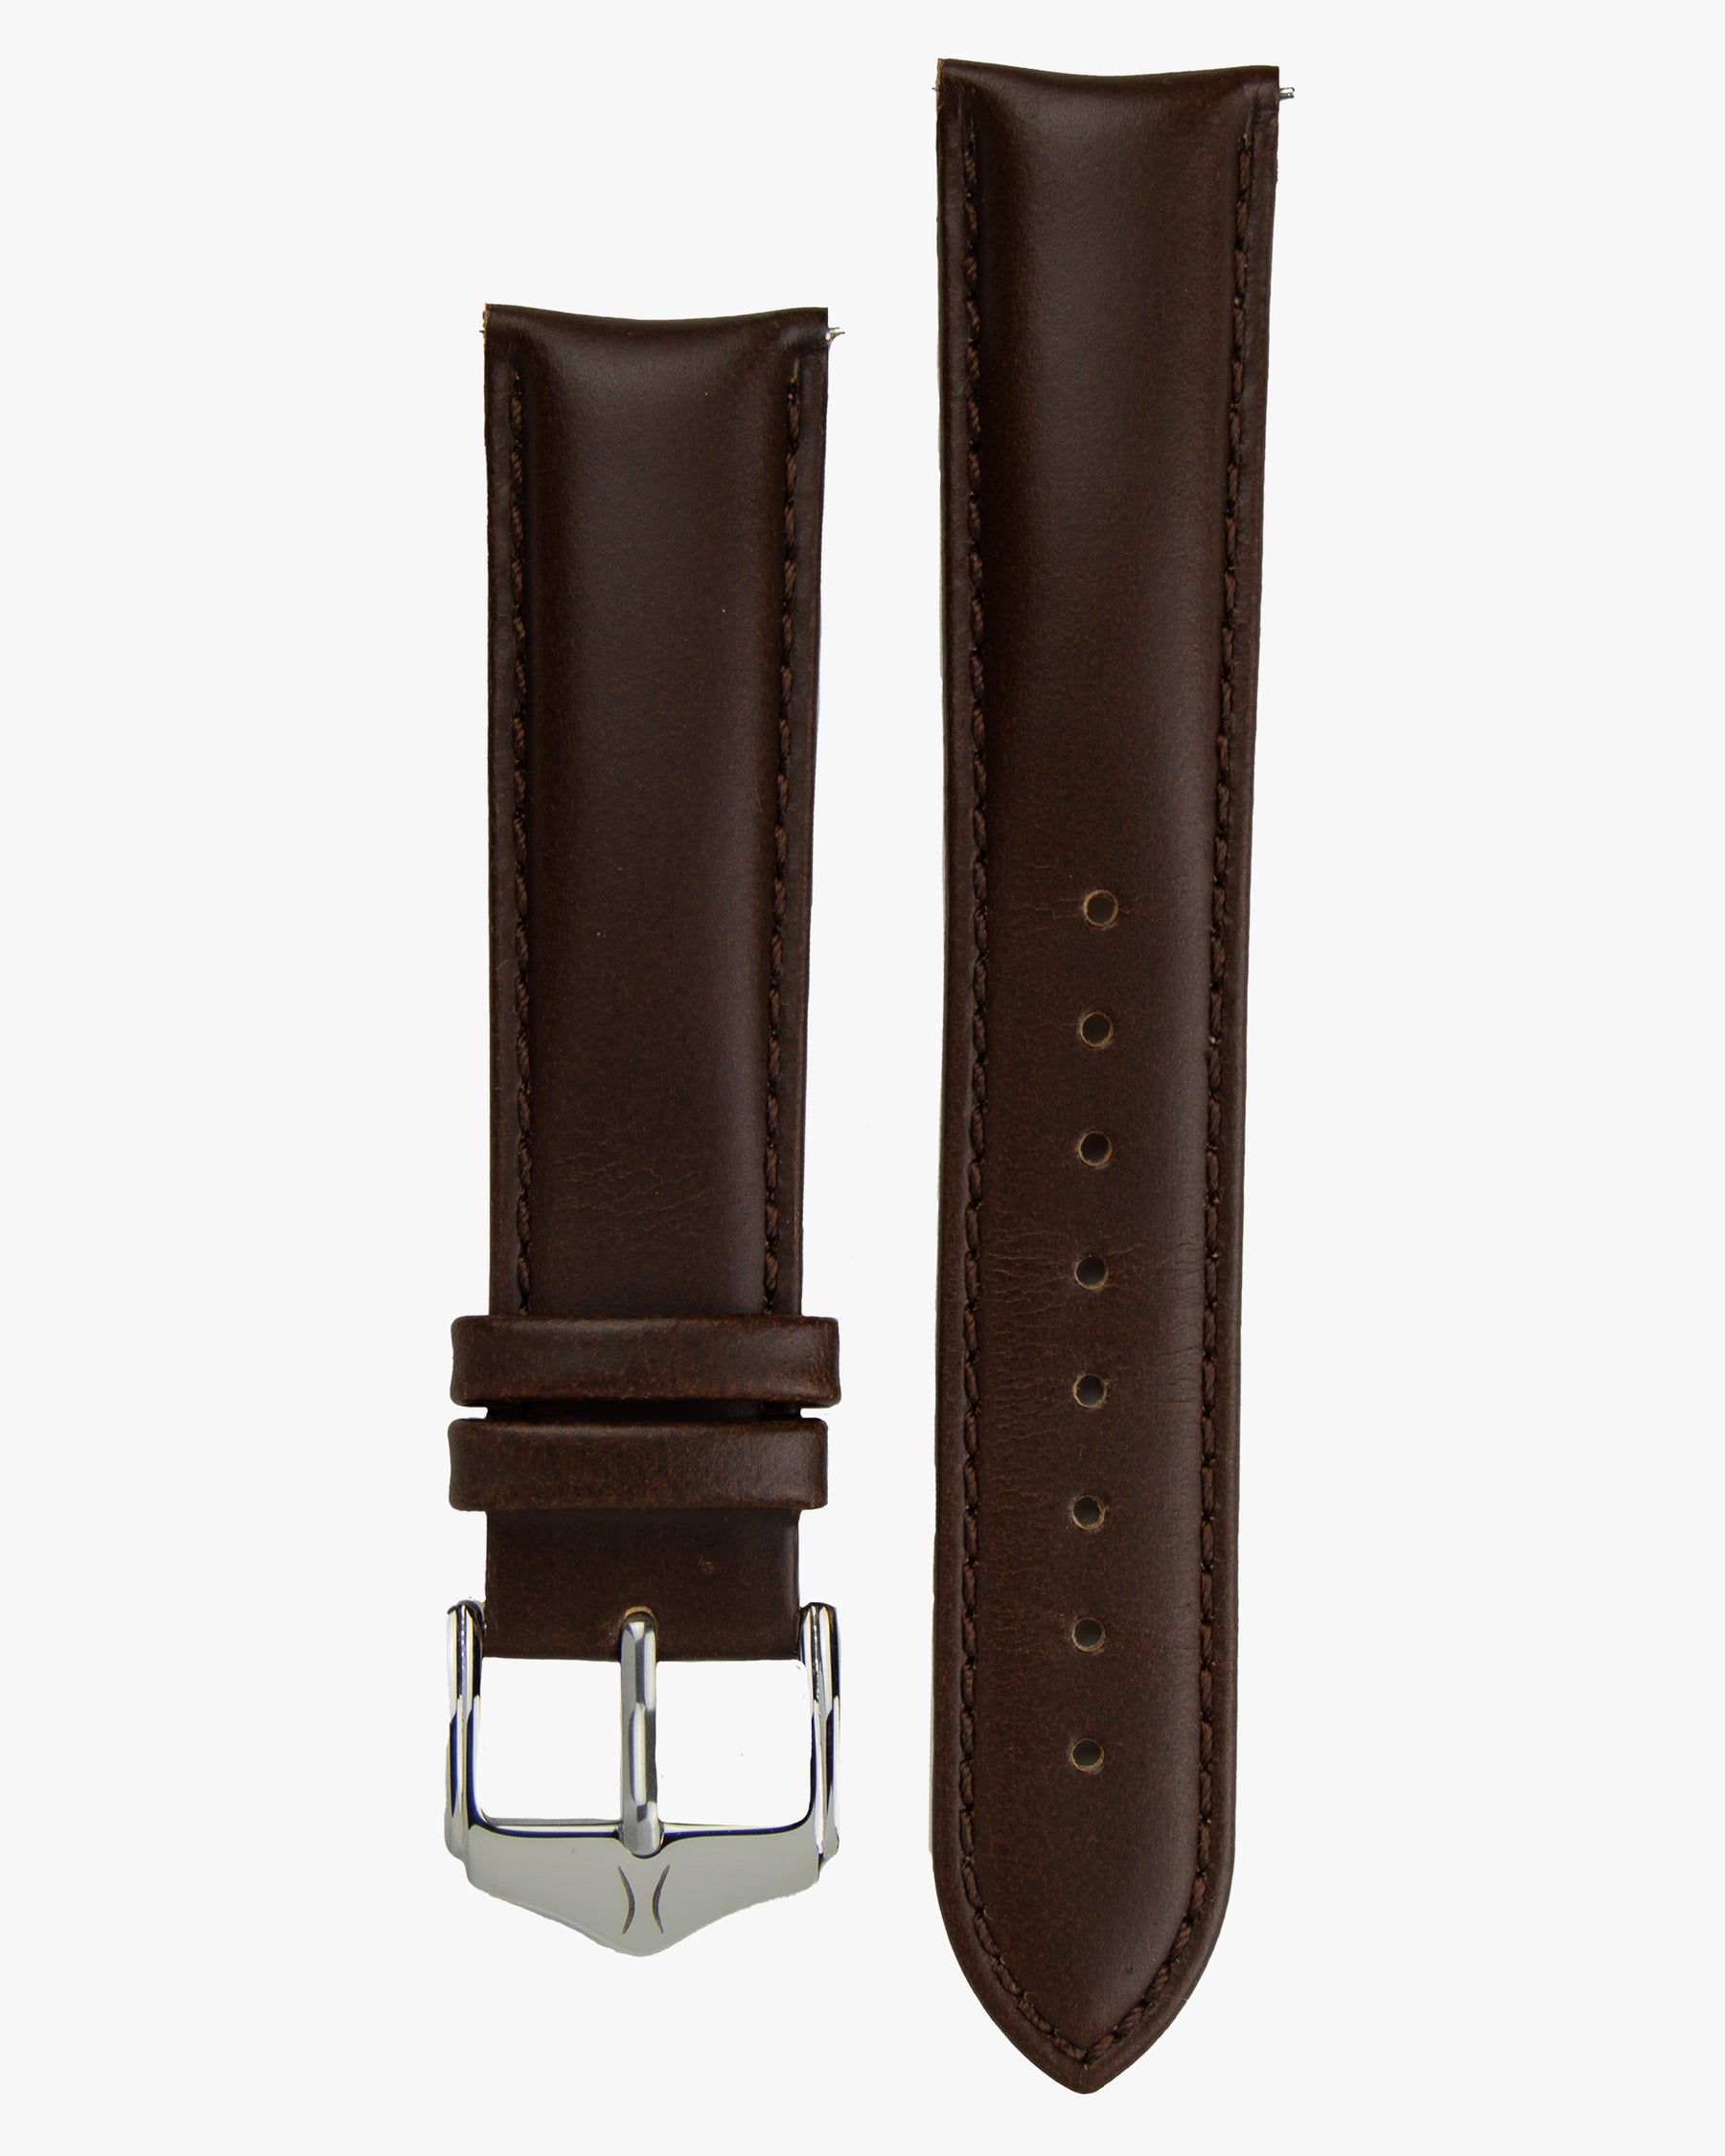 Padded Leather Watch Straps Showcase